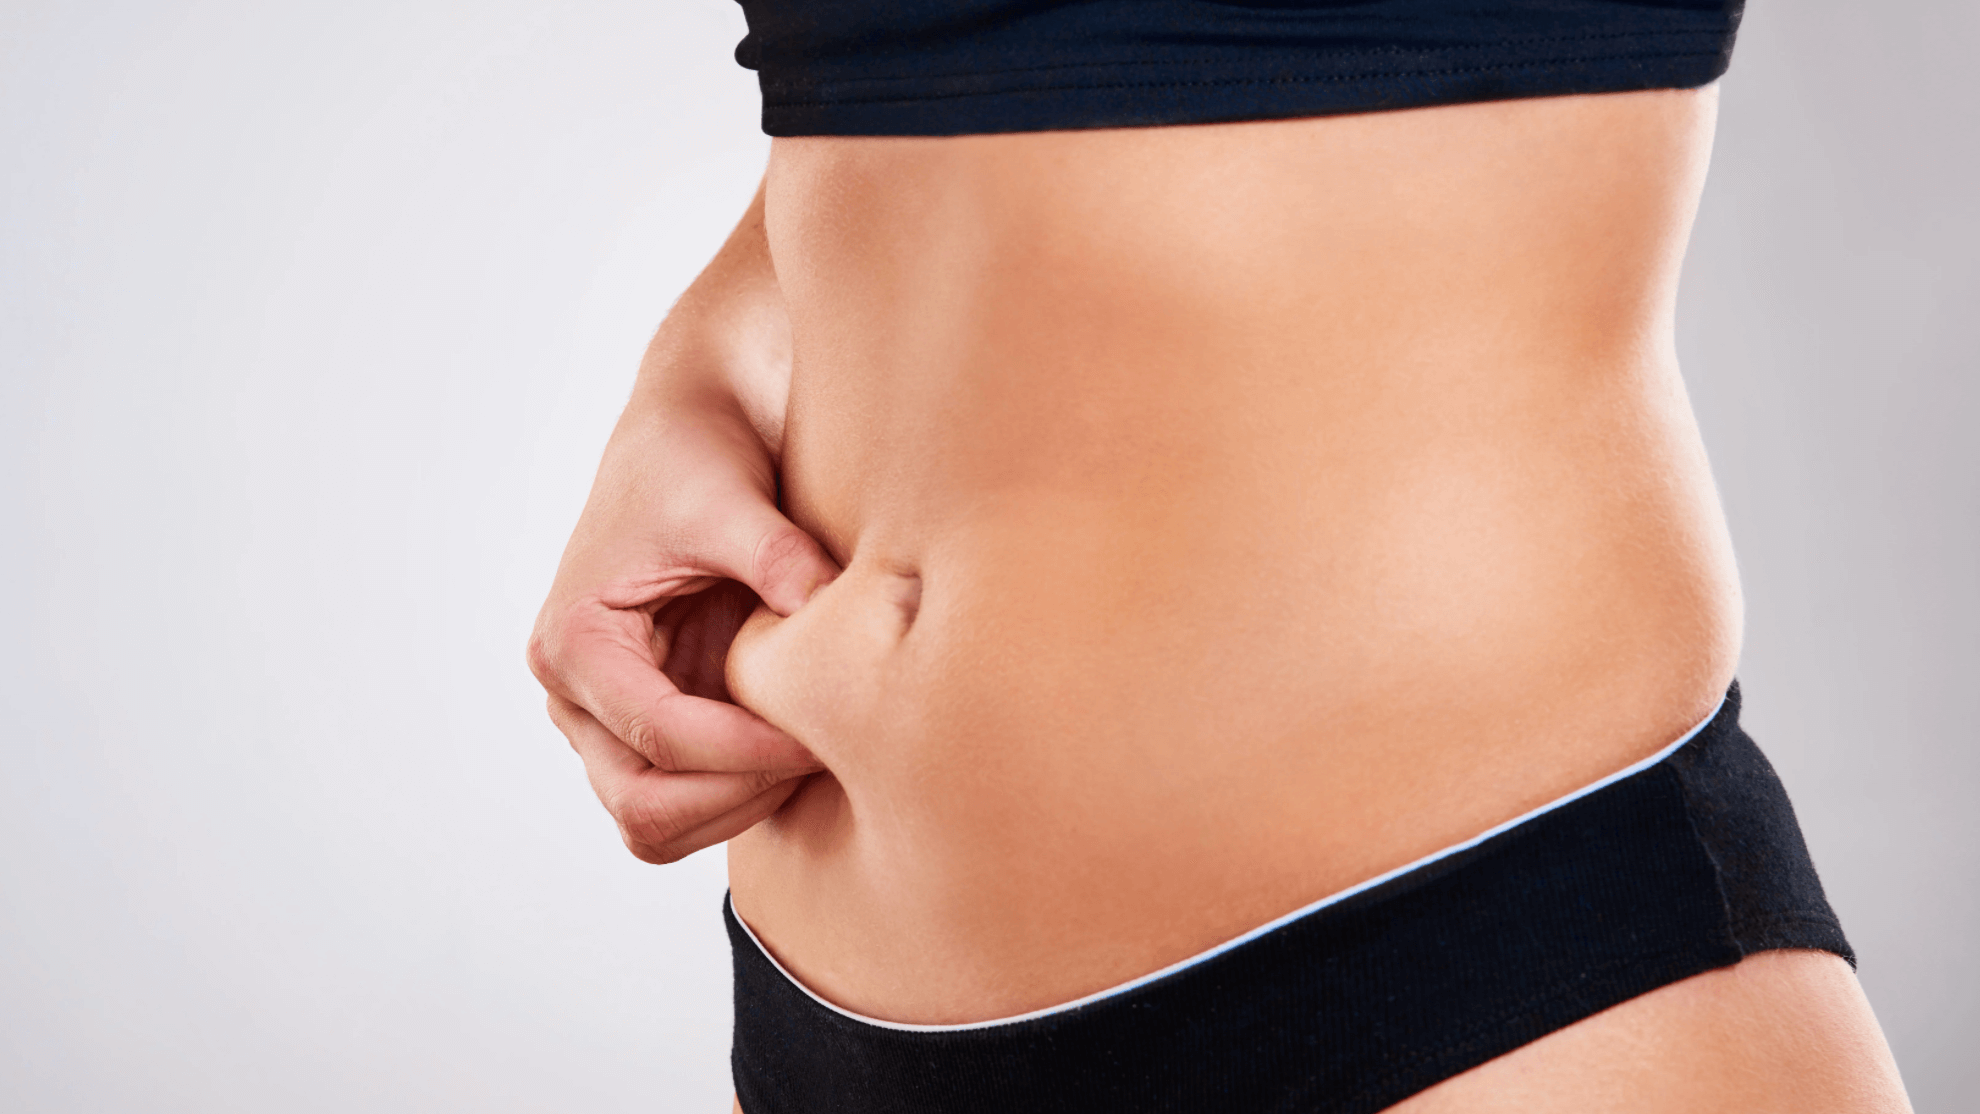 I Have Belly Pooch Fat. Should I Consider A Mini Tummy Tuck?